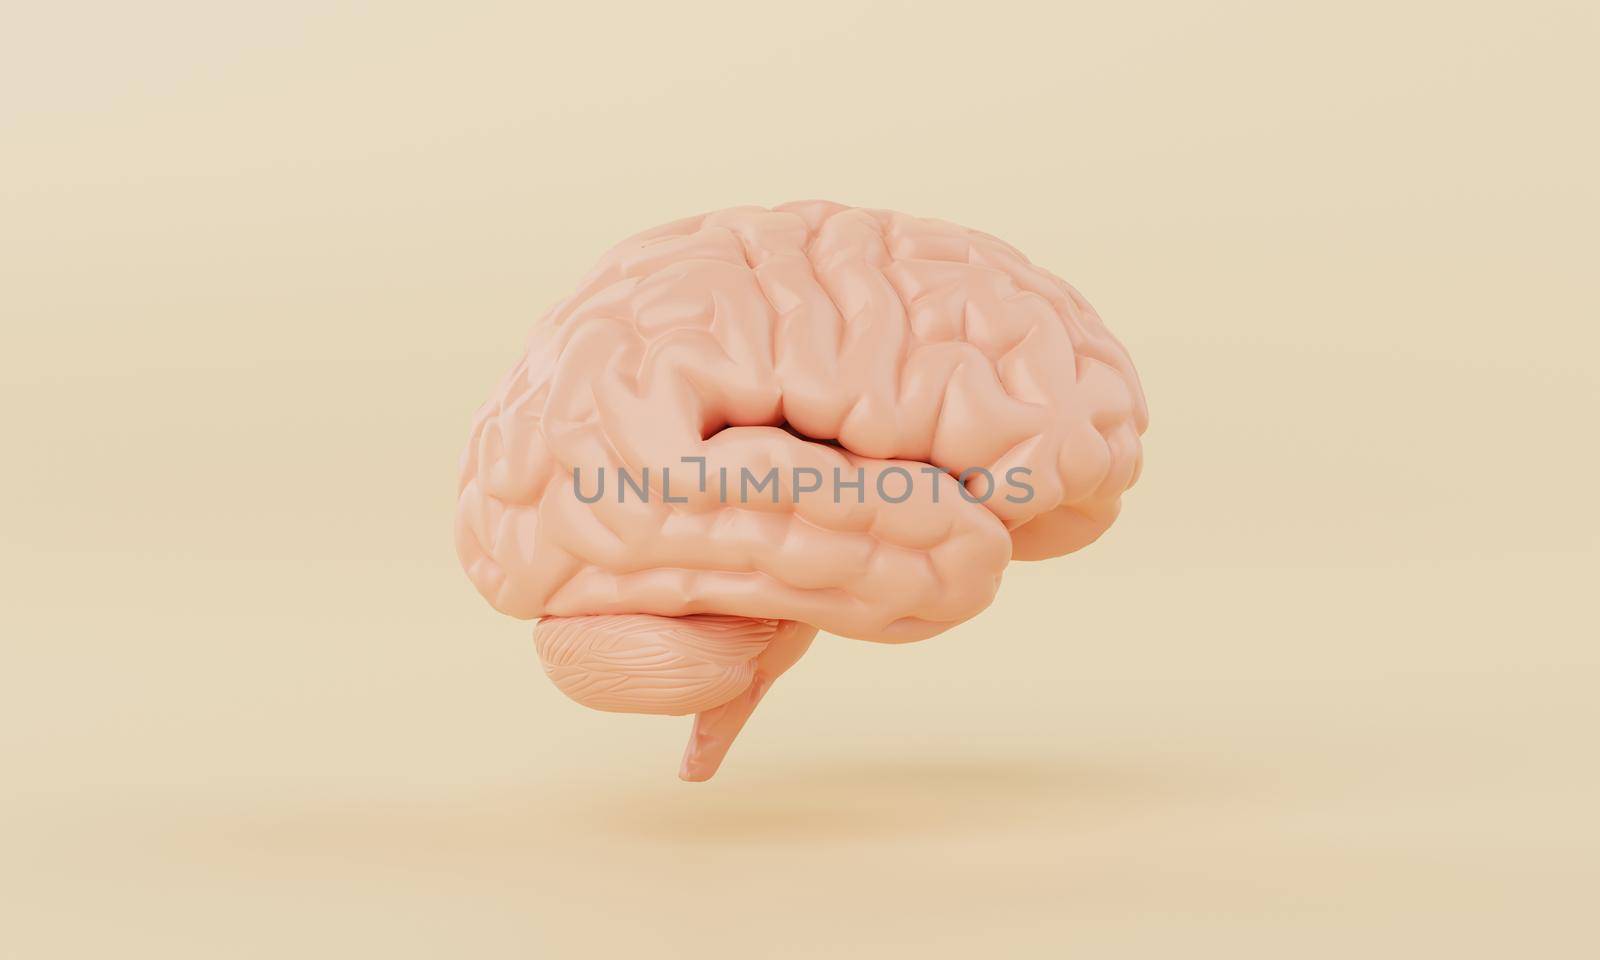 Orange simple mind brain model on yellow background. Medical science healthcare and abstract object concept. 3D illustration rendering by MiniStocker